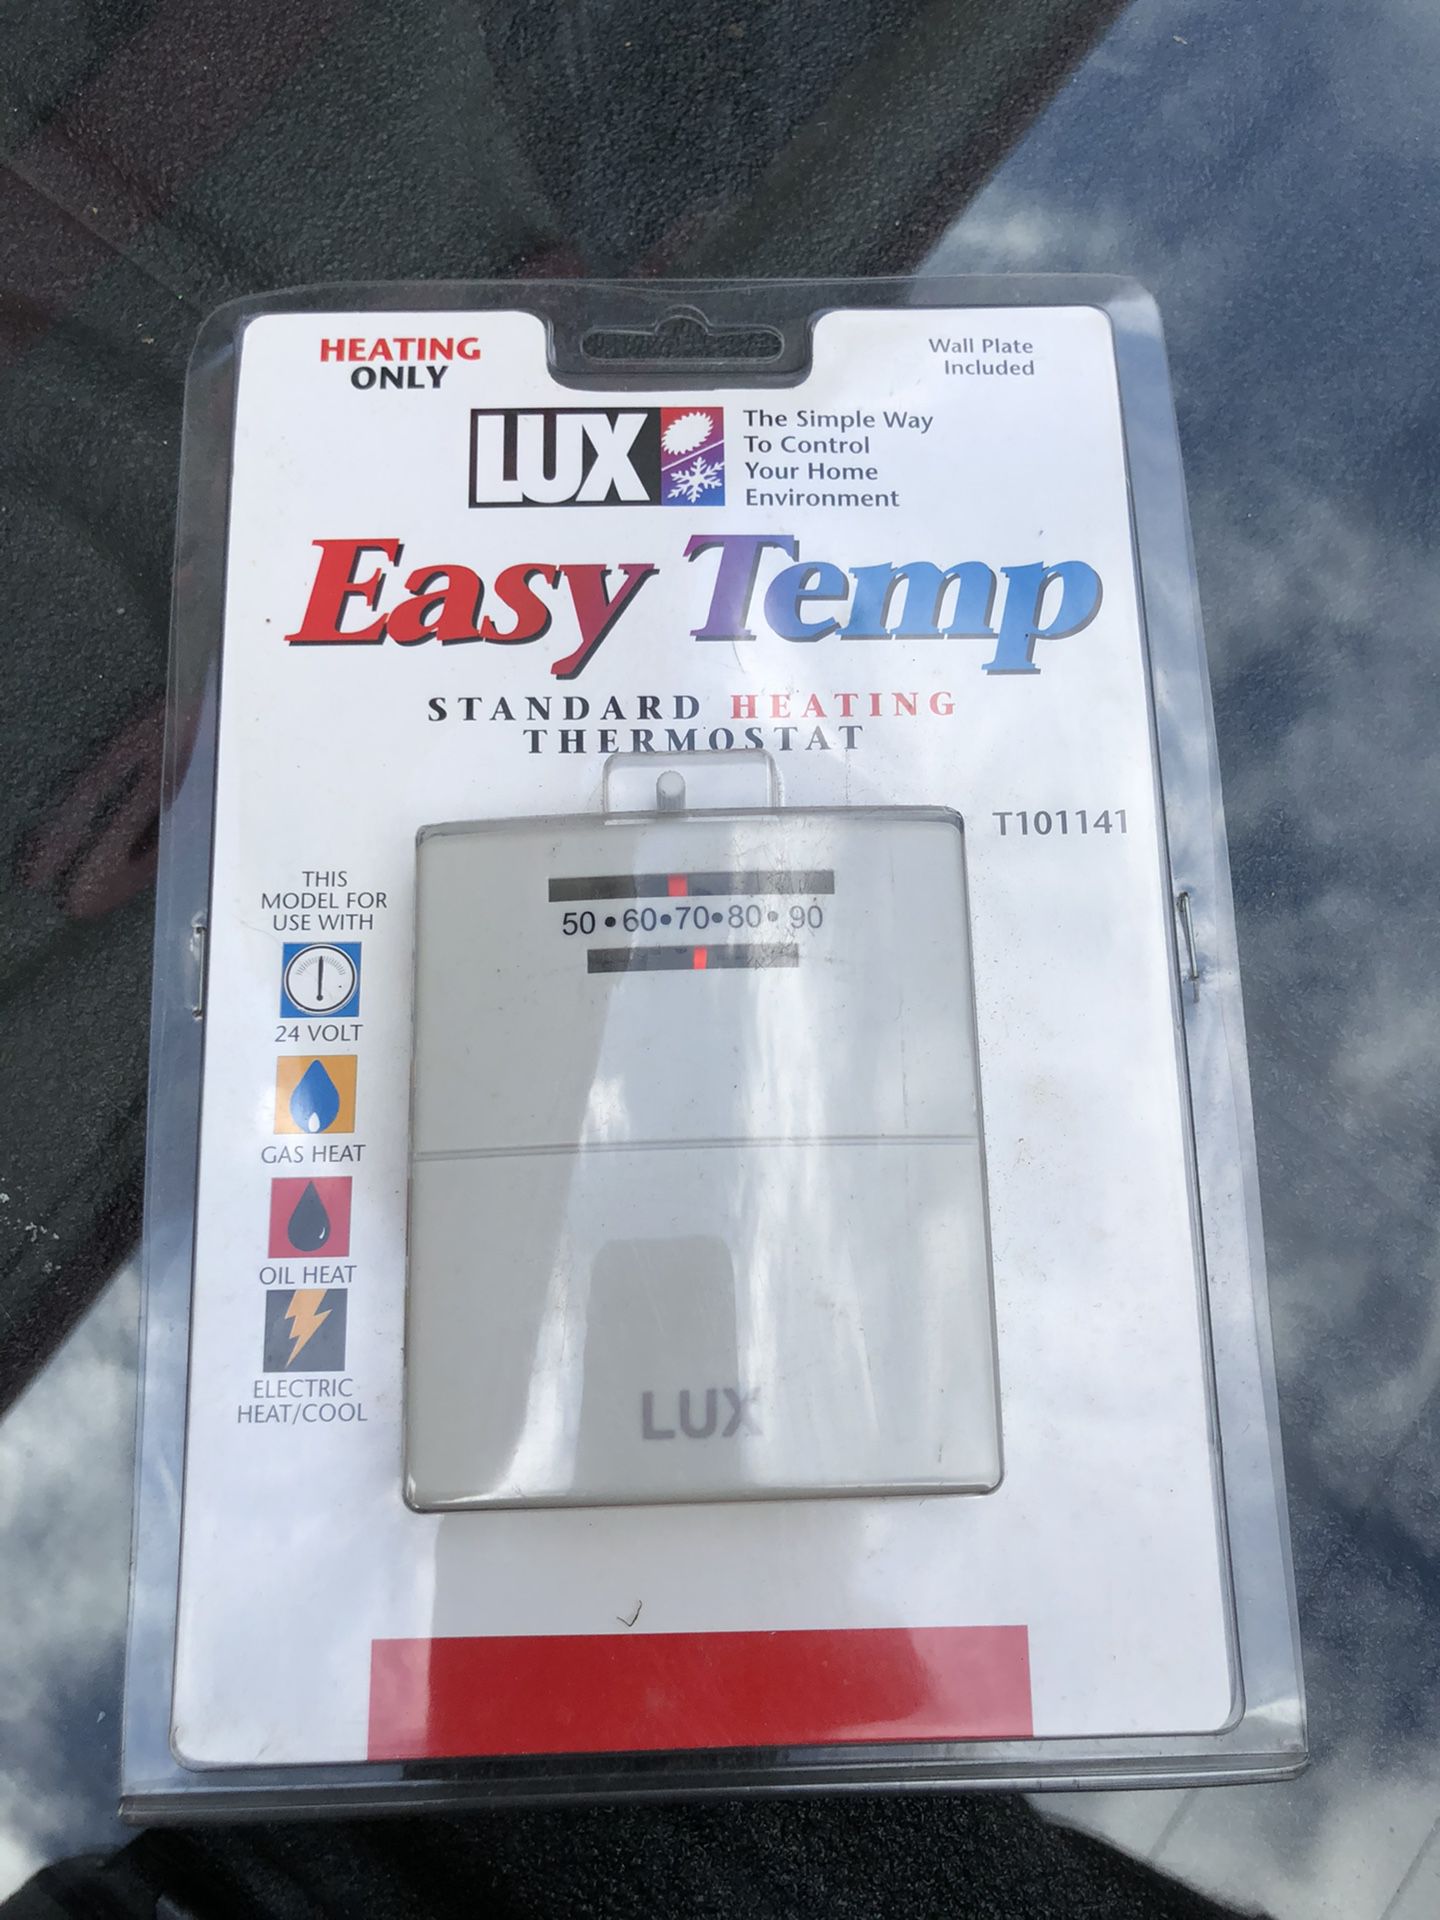 Lux Easy Temp standard heating thermostat